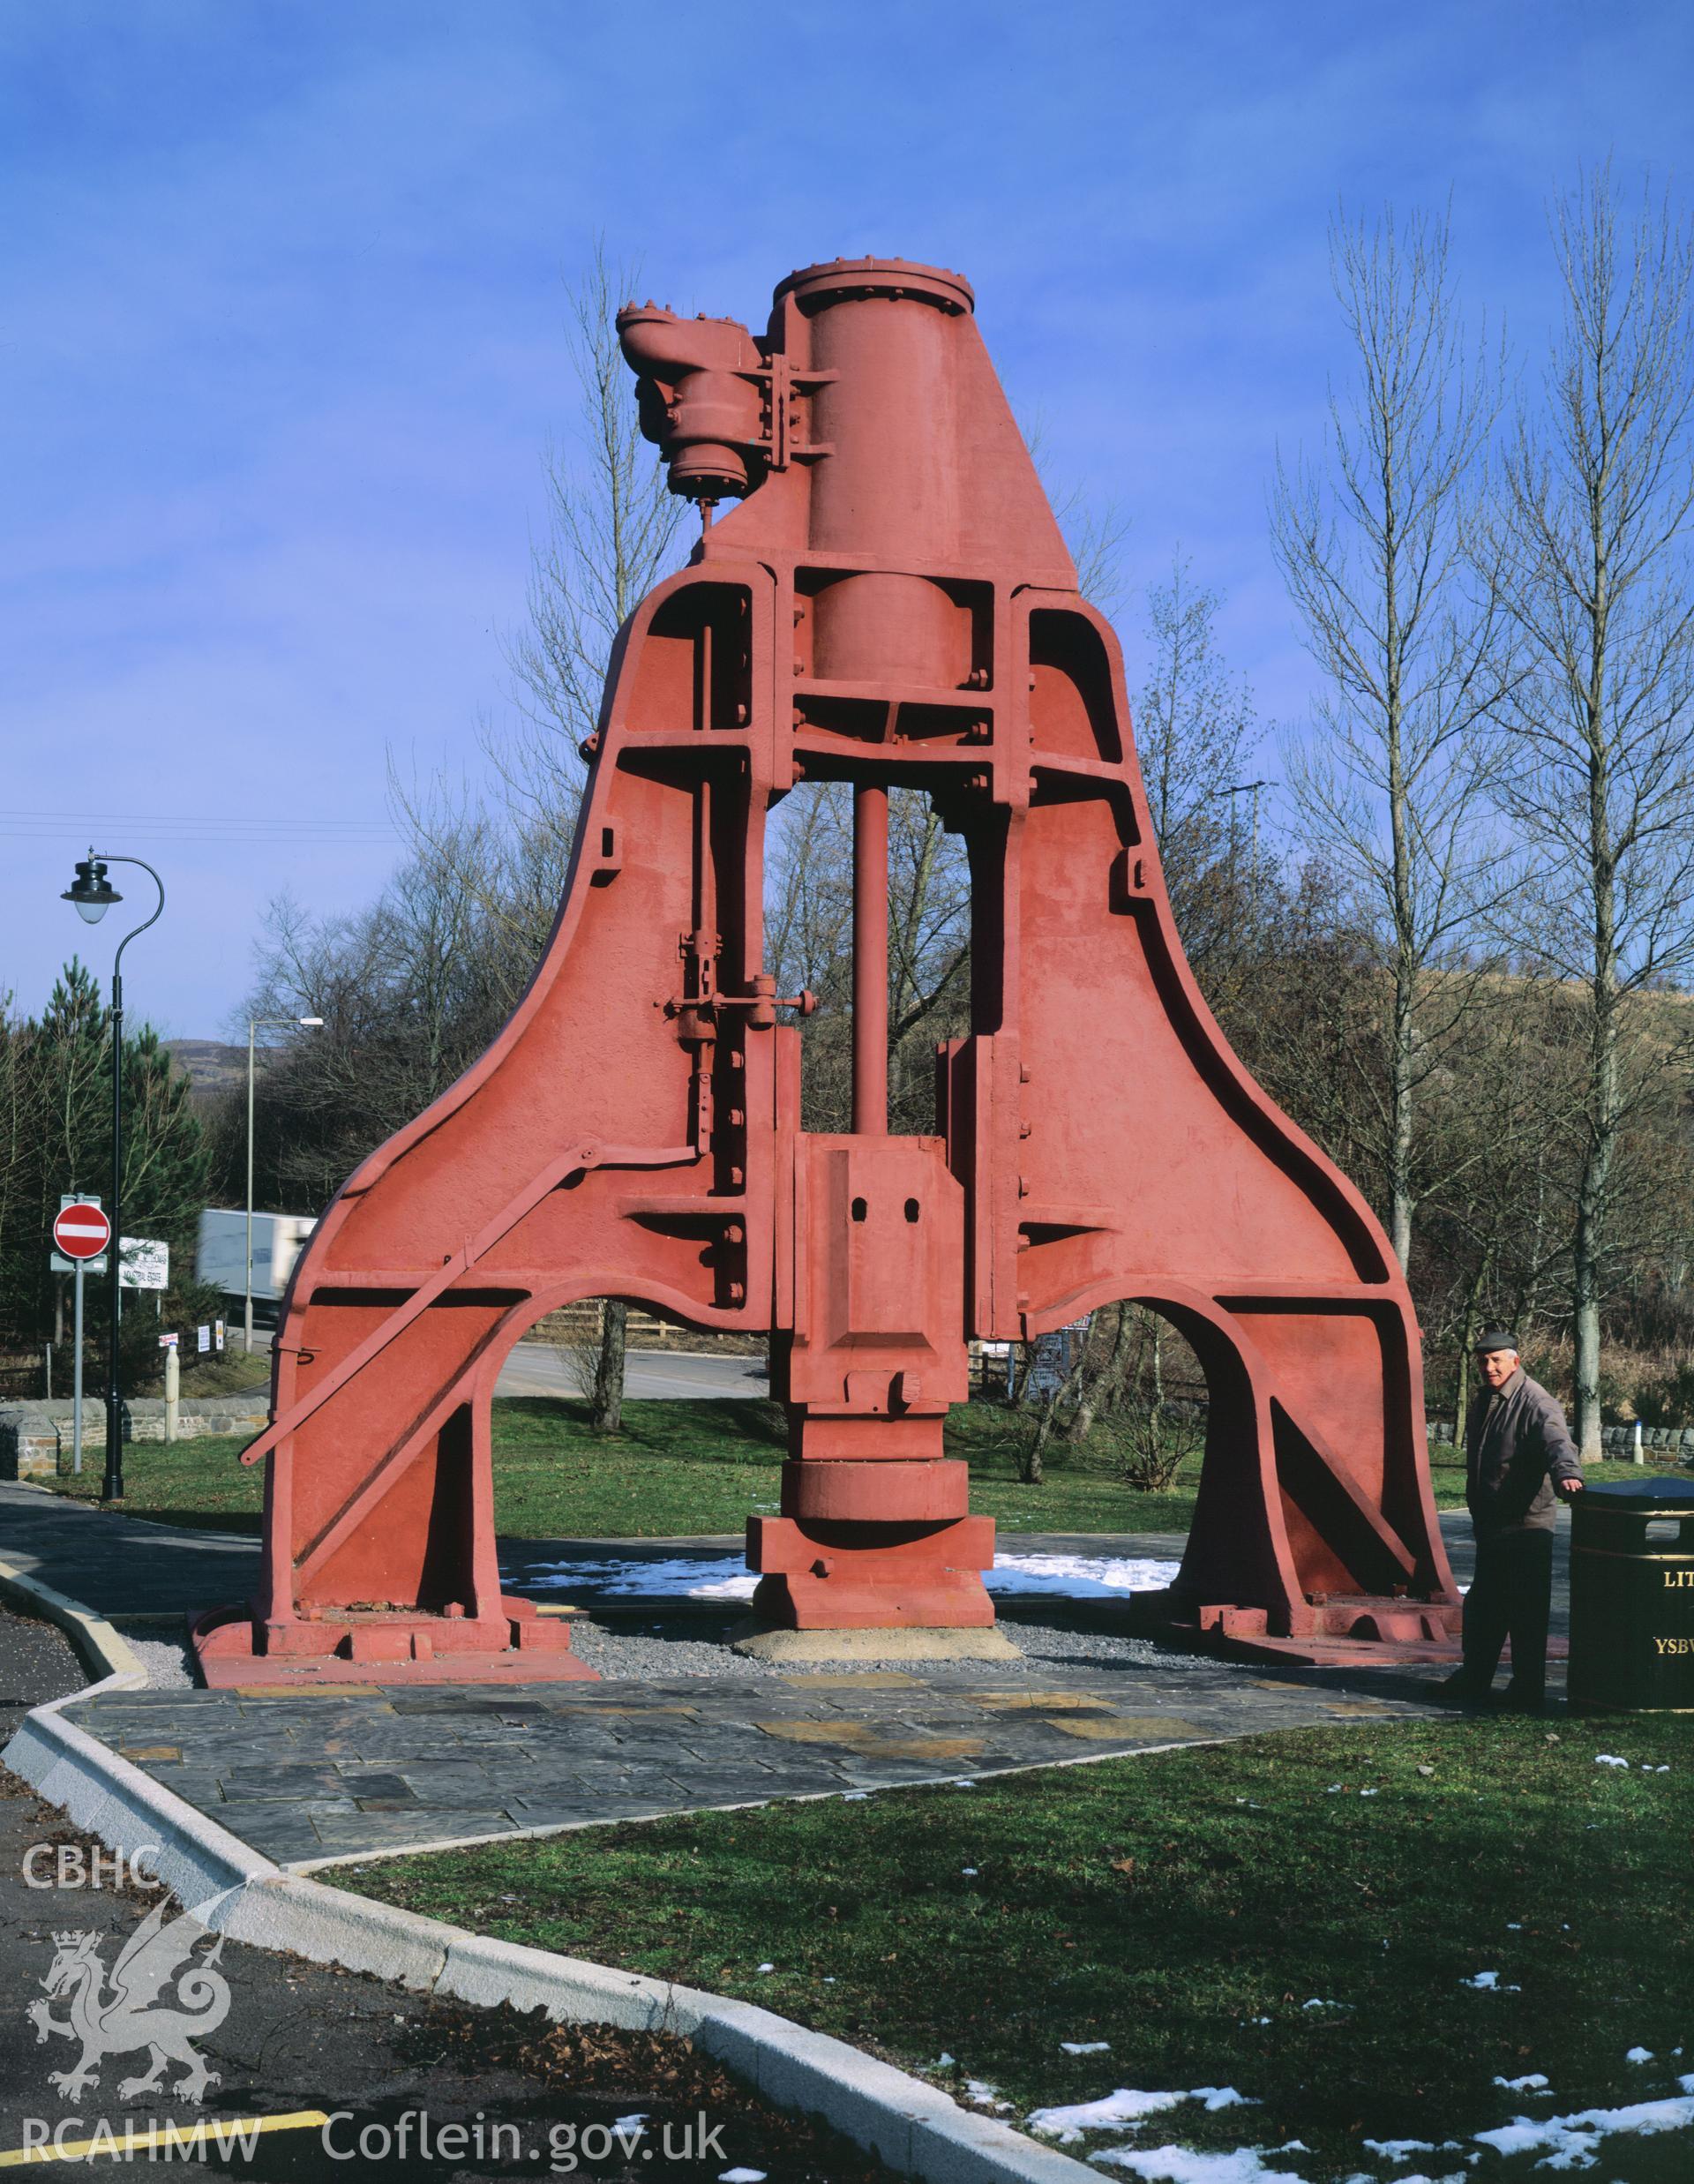 RCAHMW colour transparency showing a view of the Steam Hammer in the car park, Blaenavon, taken by Iain Wright, March 2004.